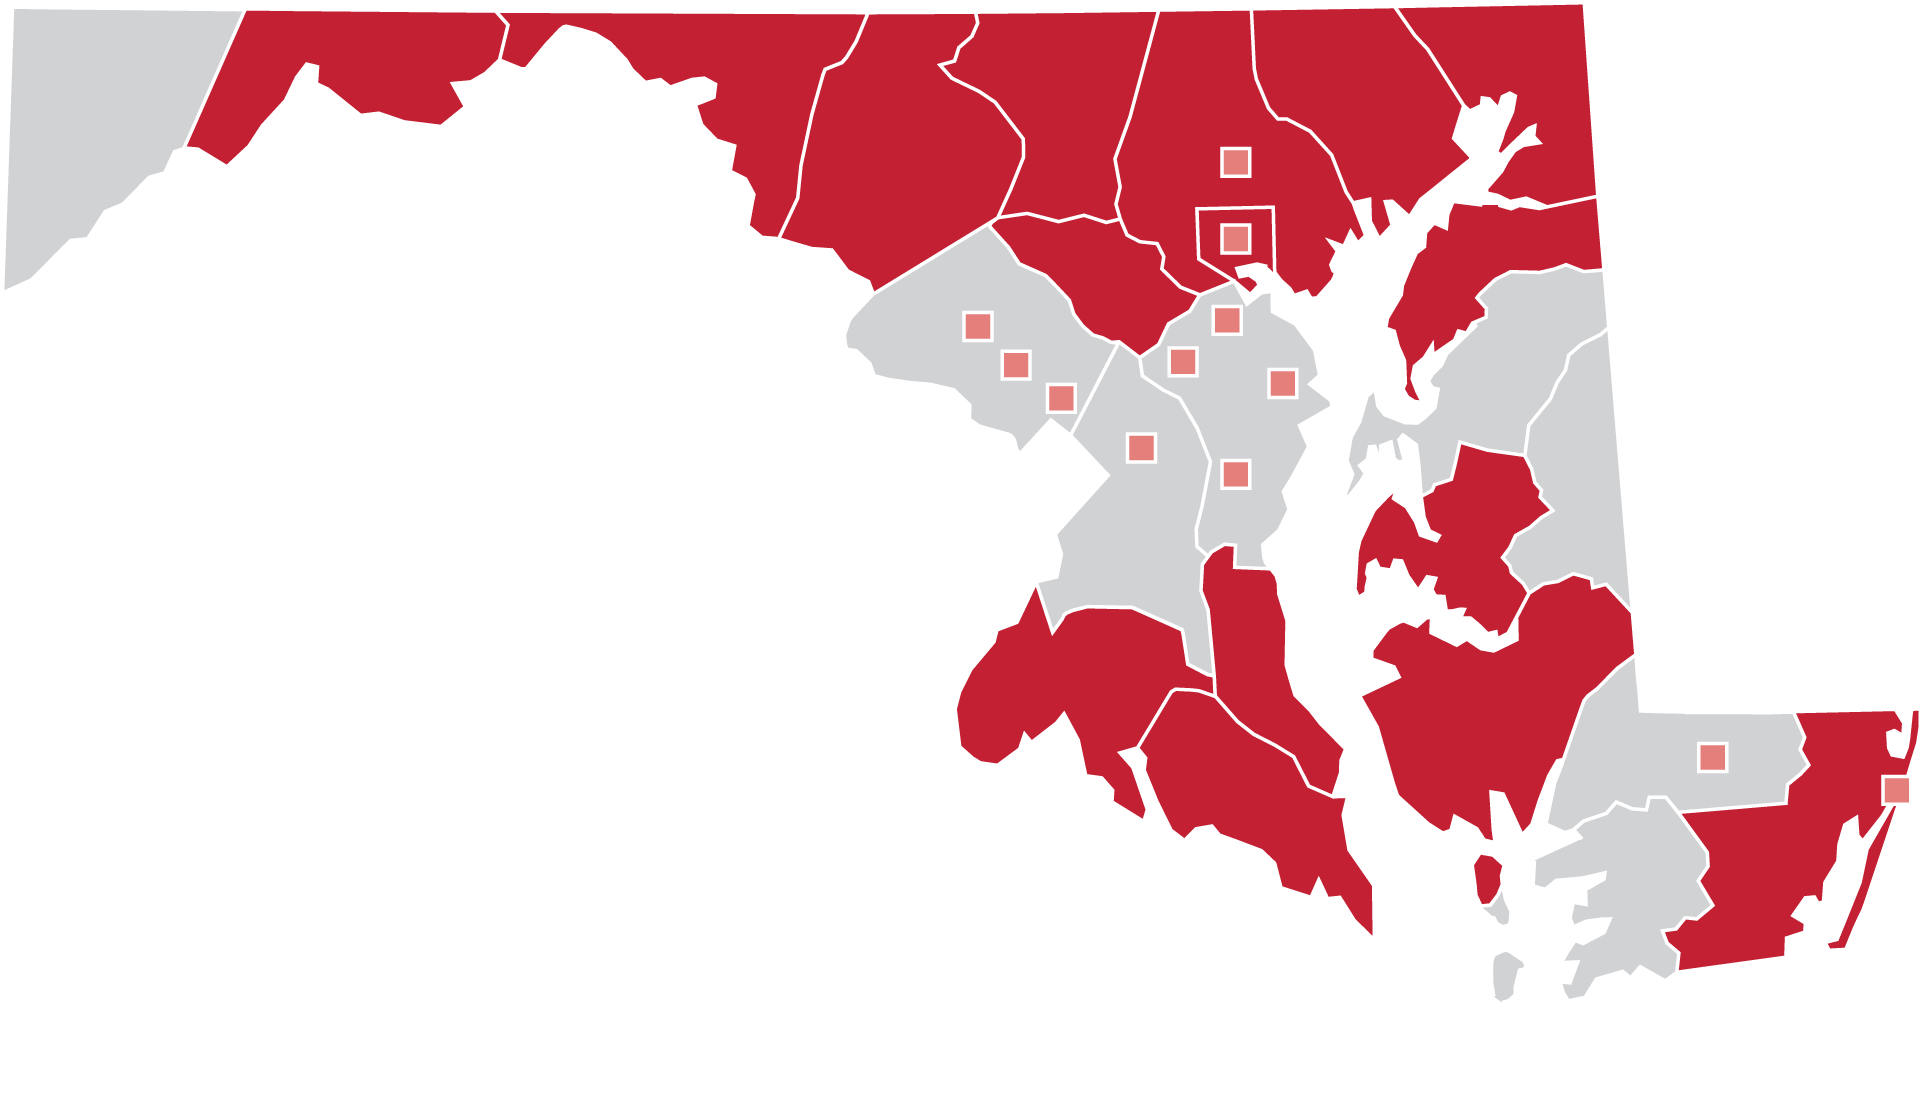 Map of Maryland counties; counties with a participating local or regional chamber who are members of the Maryland Chamber Federation are highlighted in red or with salmon-colored squares.